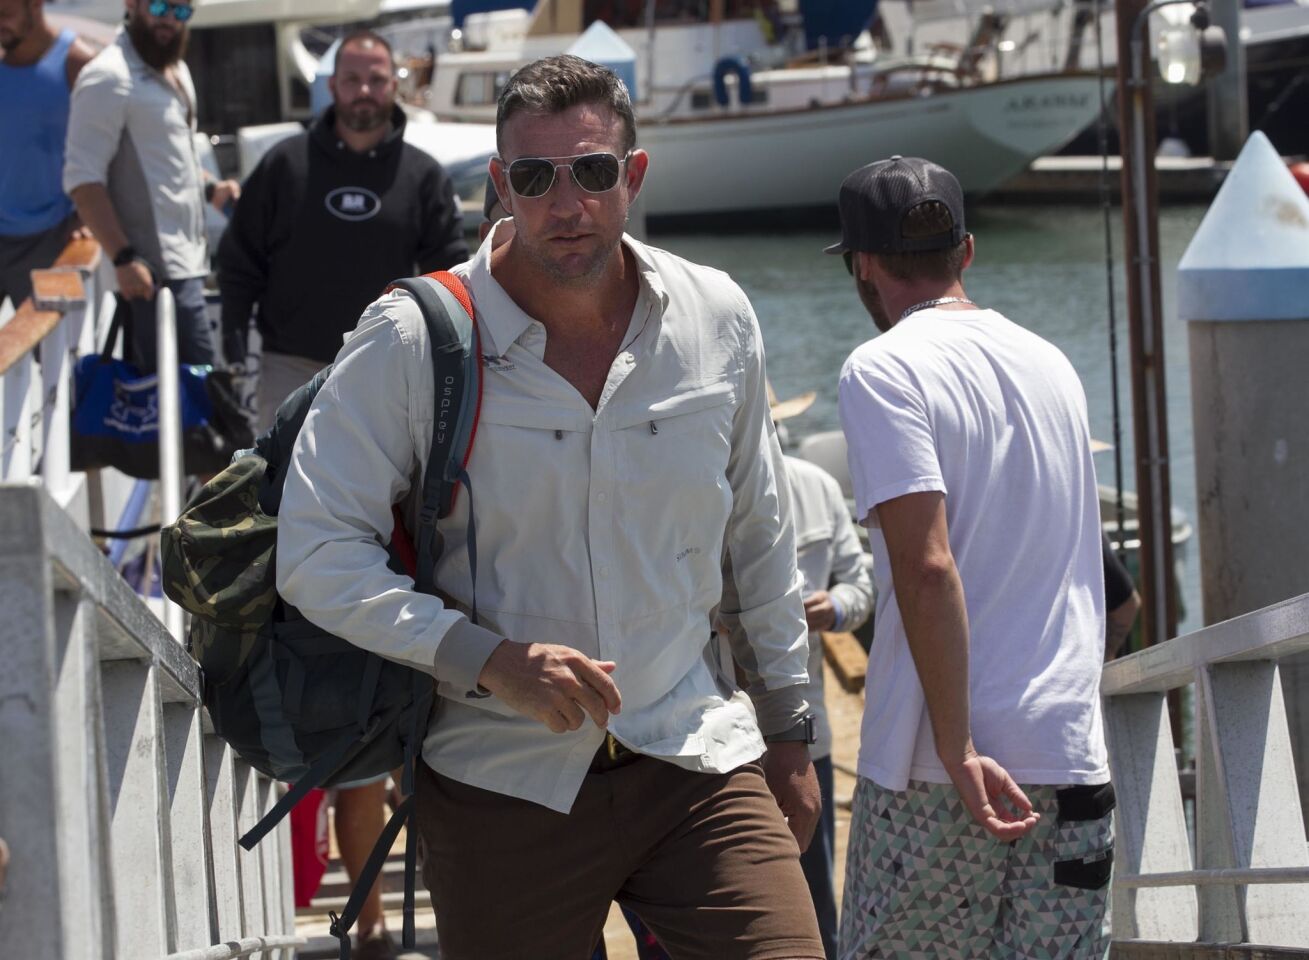 Congressman Duncan D. Hunter, who was indicted yesterday on campaign finance violations walked up the the dock from the fishing boat Dolphin after returning from a Rivers of Recovery Fishing Tournament for Wounded Combat Veterans fundraiser in San Diego.